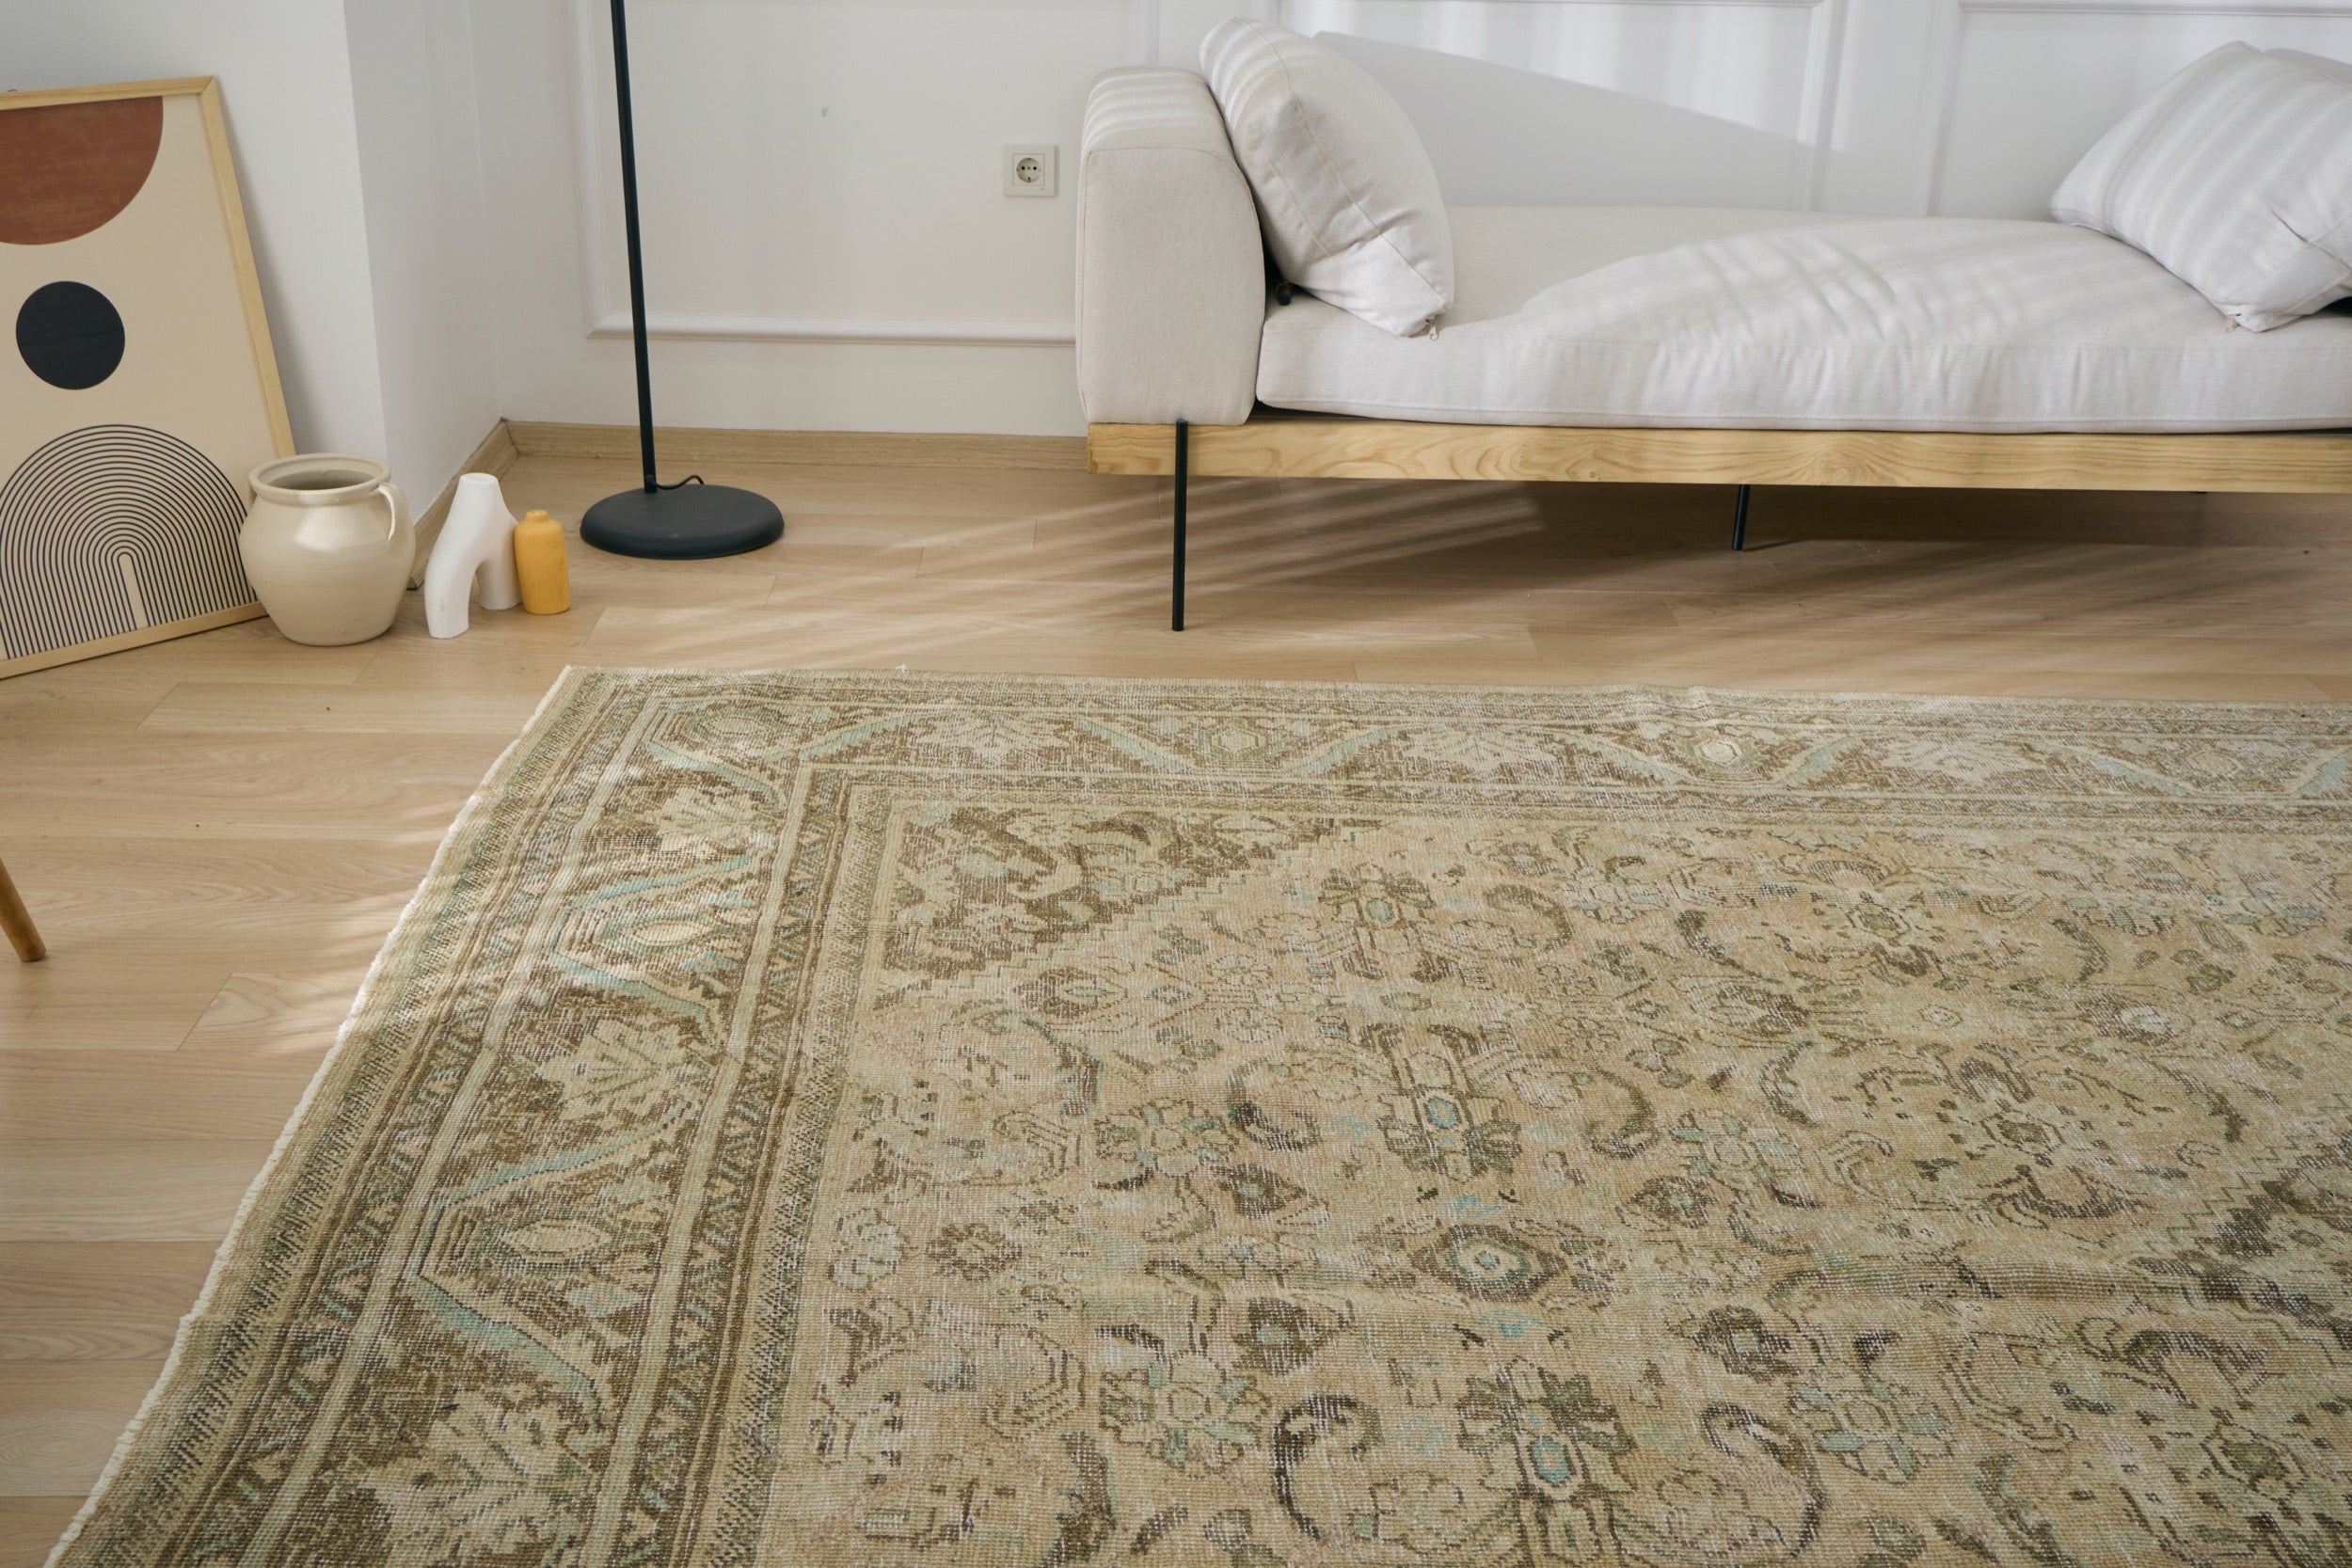 Yama - Time-Honored Techniques | Kuden Rugs